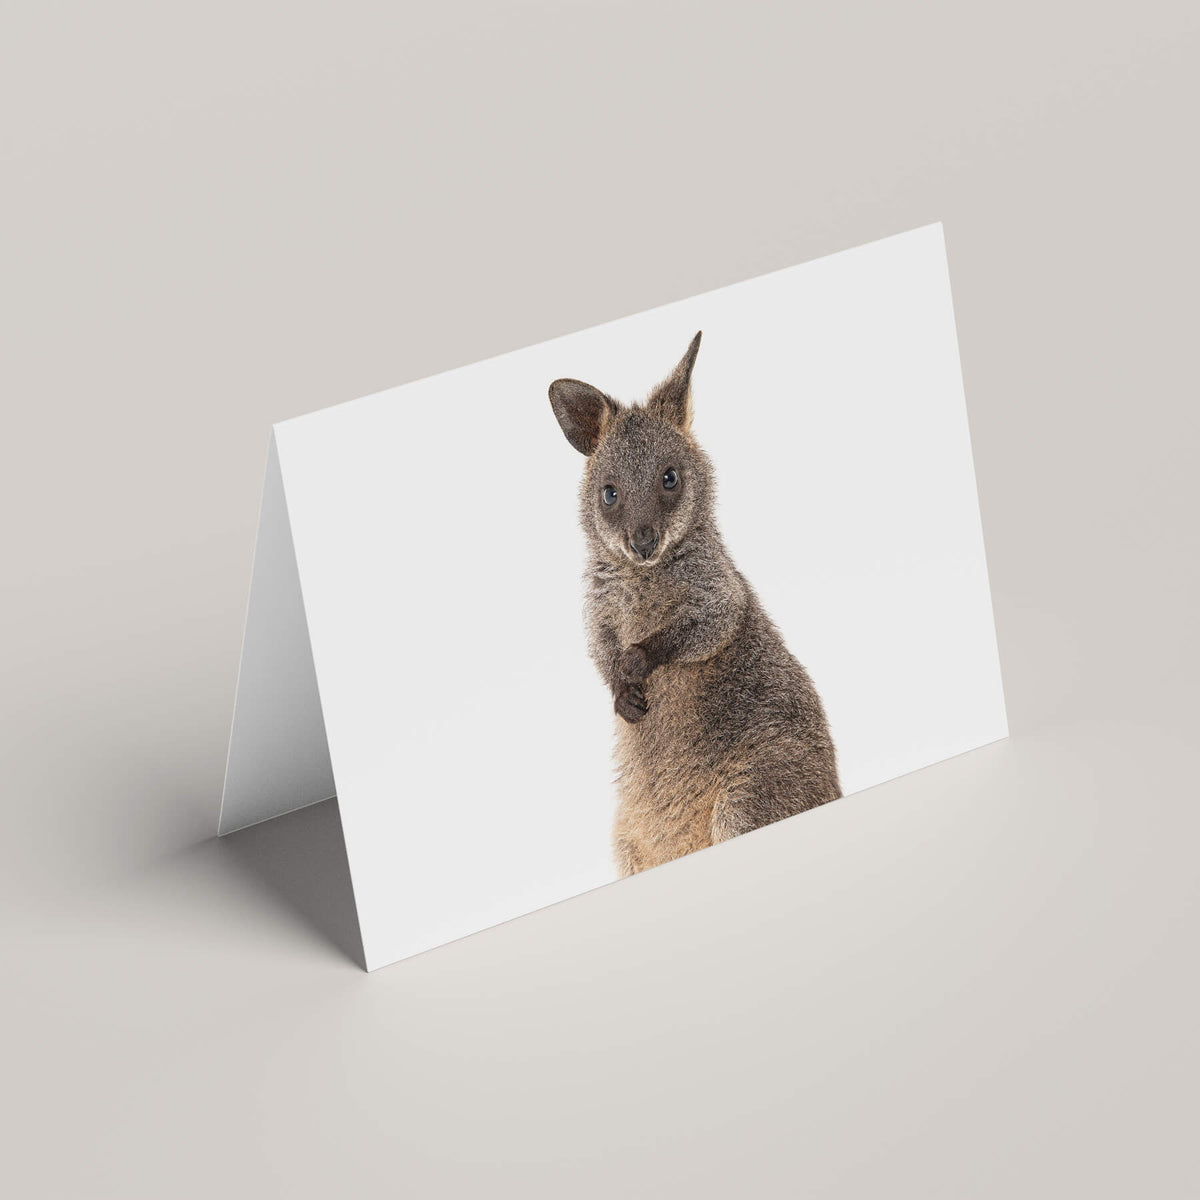 Coco, the Swamp Wallaby